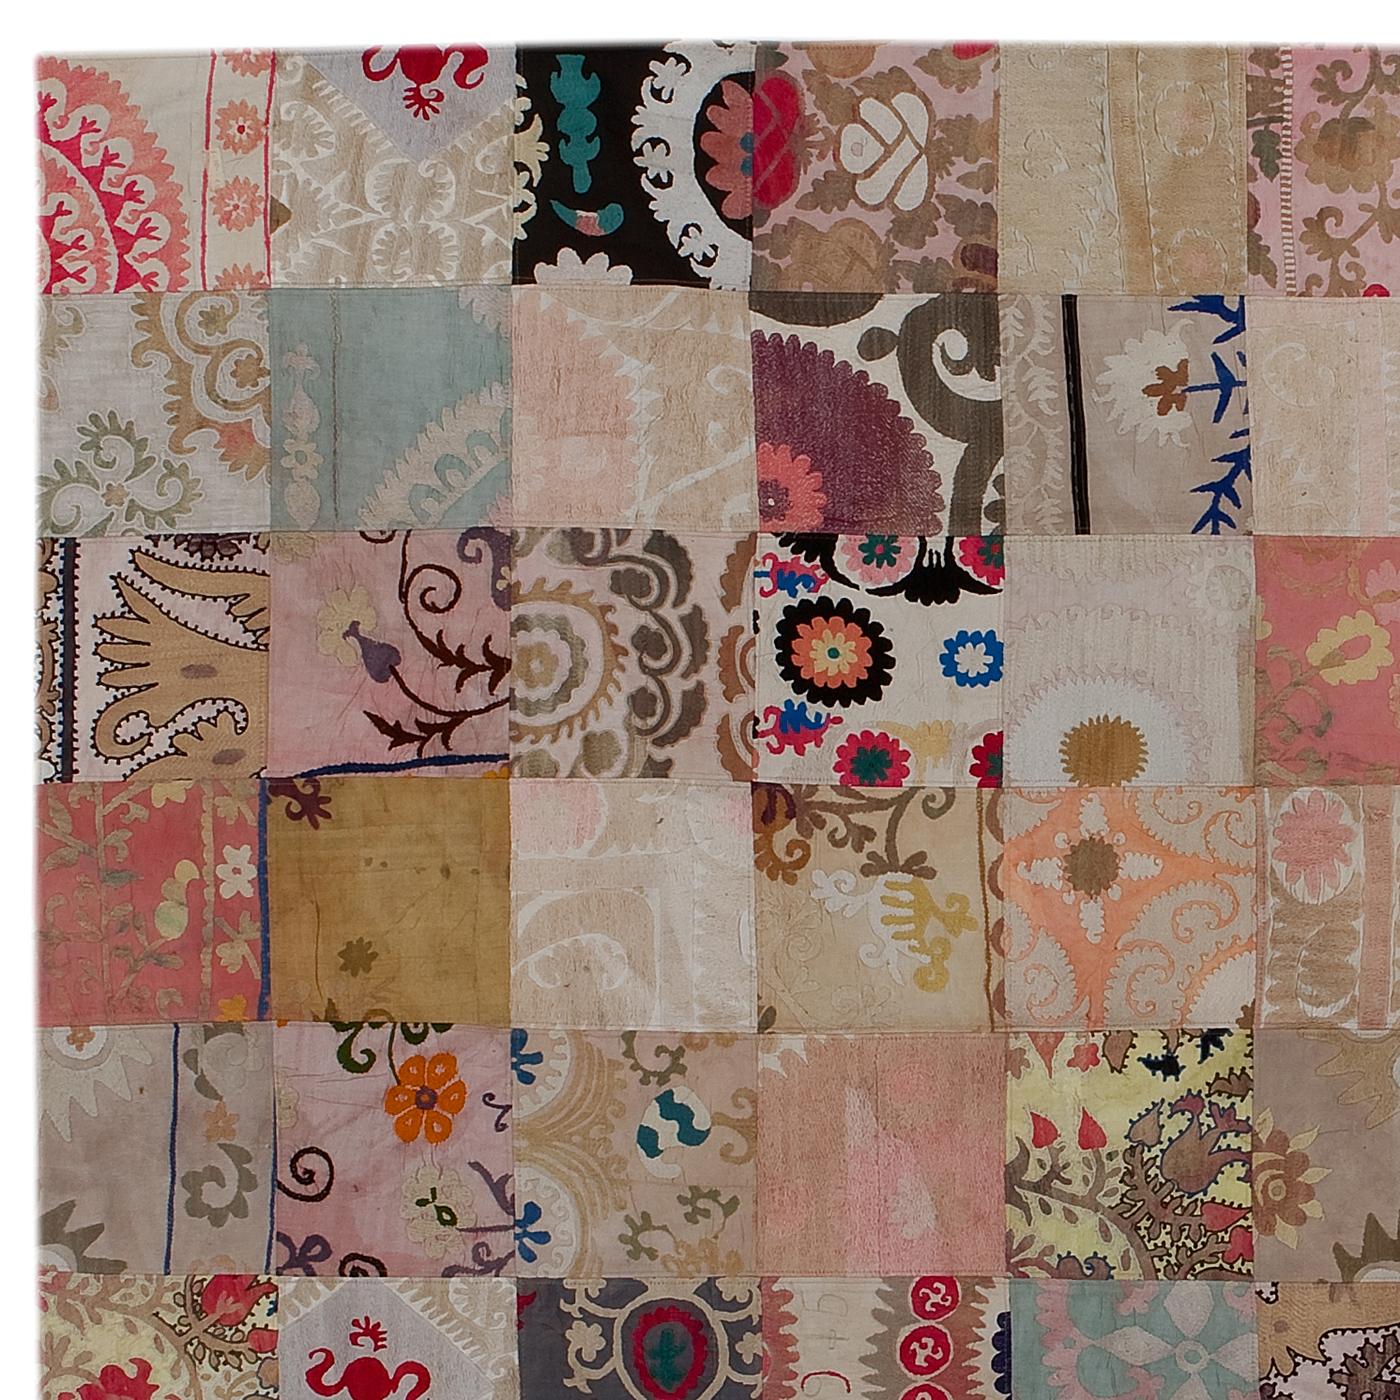 This unique carpet was entirely handmade using the patchwork technique. Its components are different pieces of vintage rugs made with varying materials and coming from different areas. The results are one-of-a-kind floor decorations that artfully